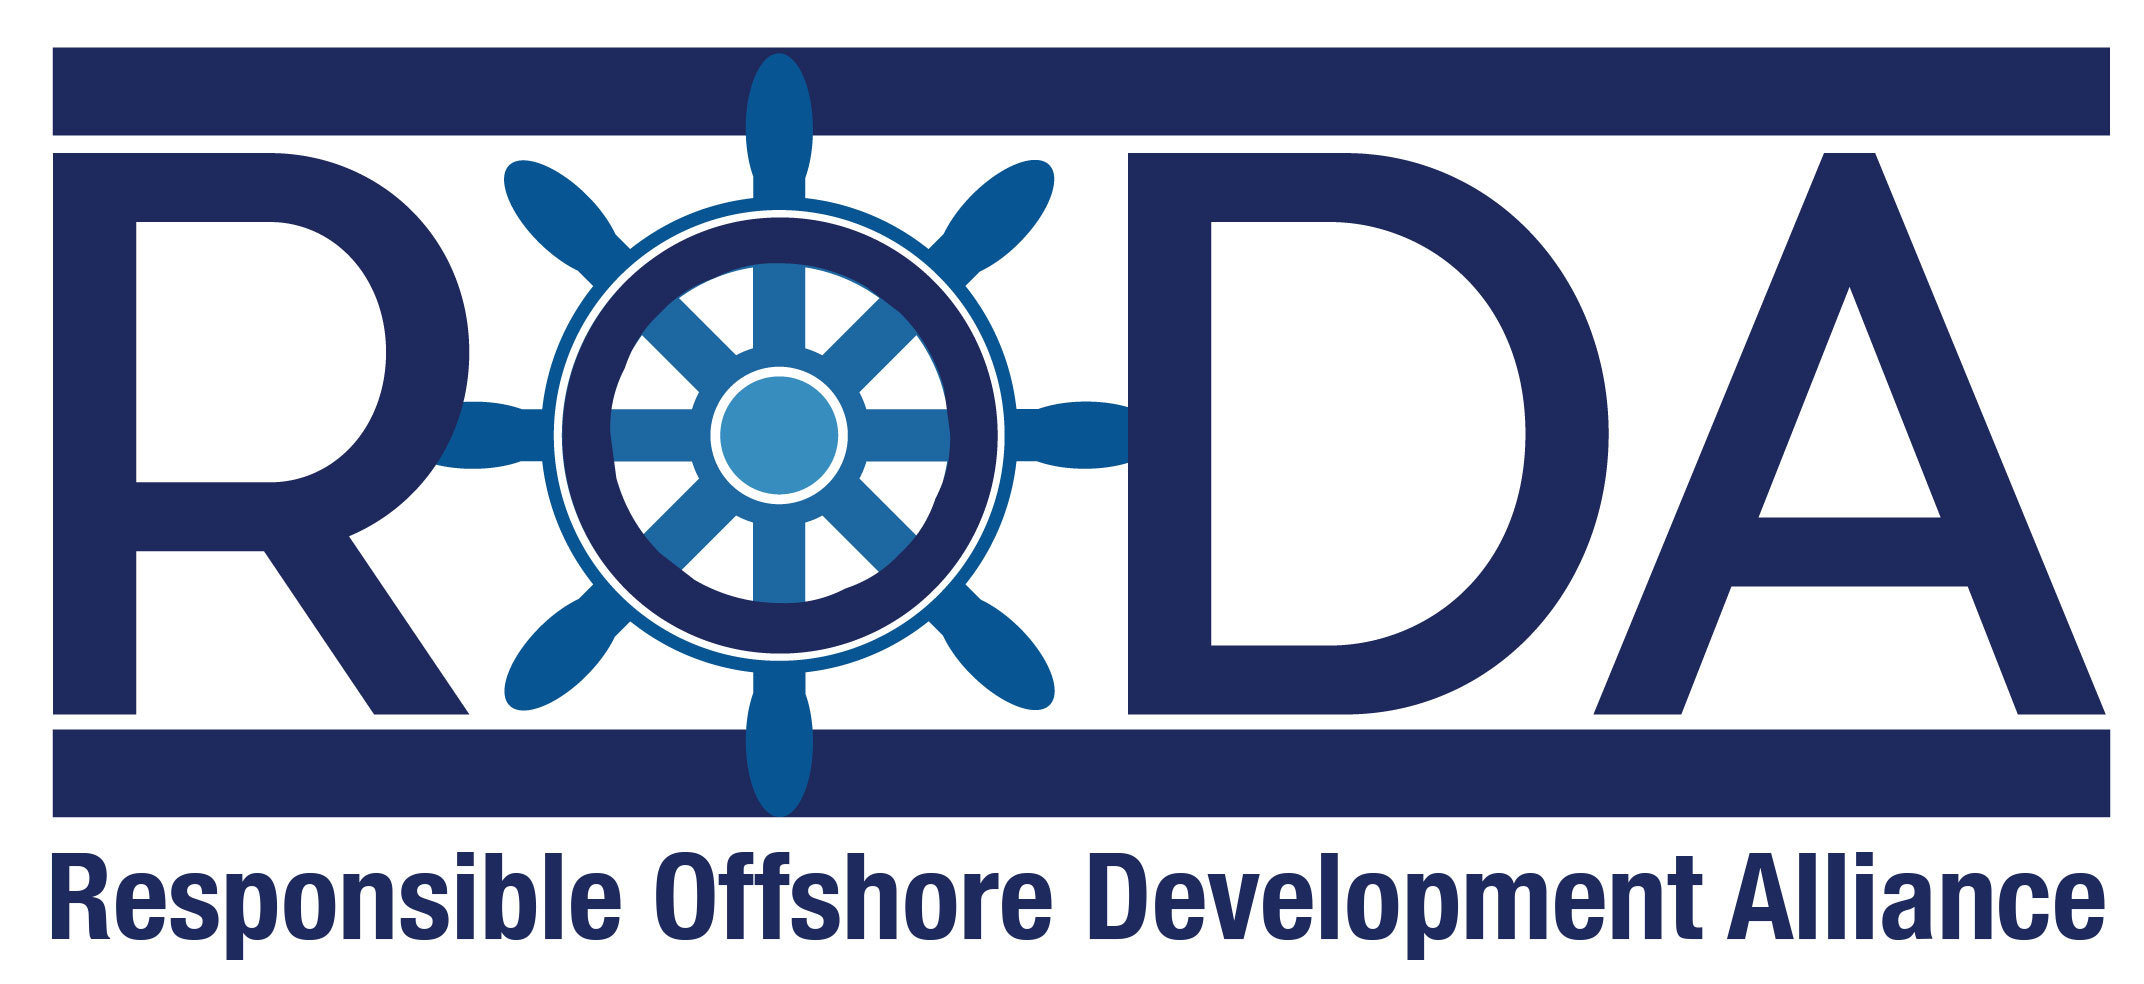 Responsible Offshore Development Alliance, Thursday, January 16, 2020, Press release picture